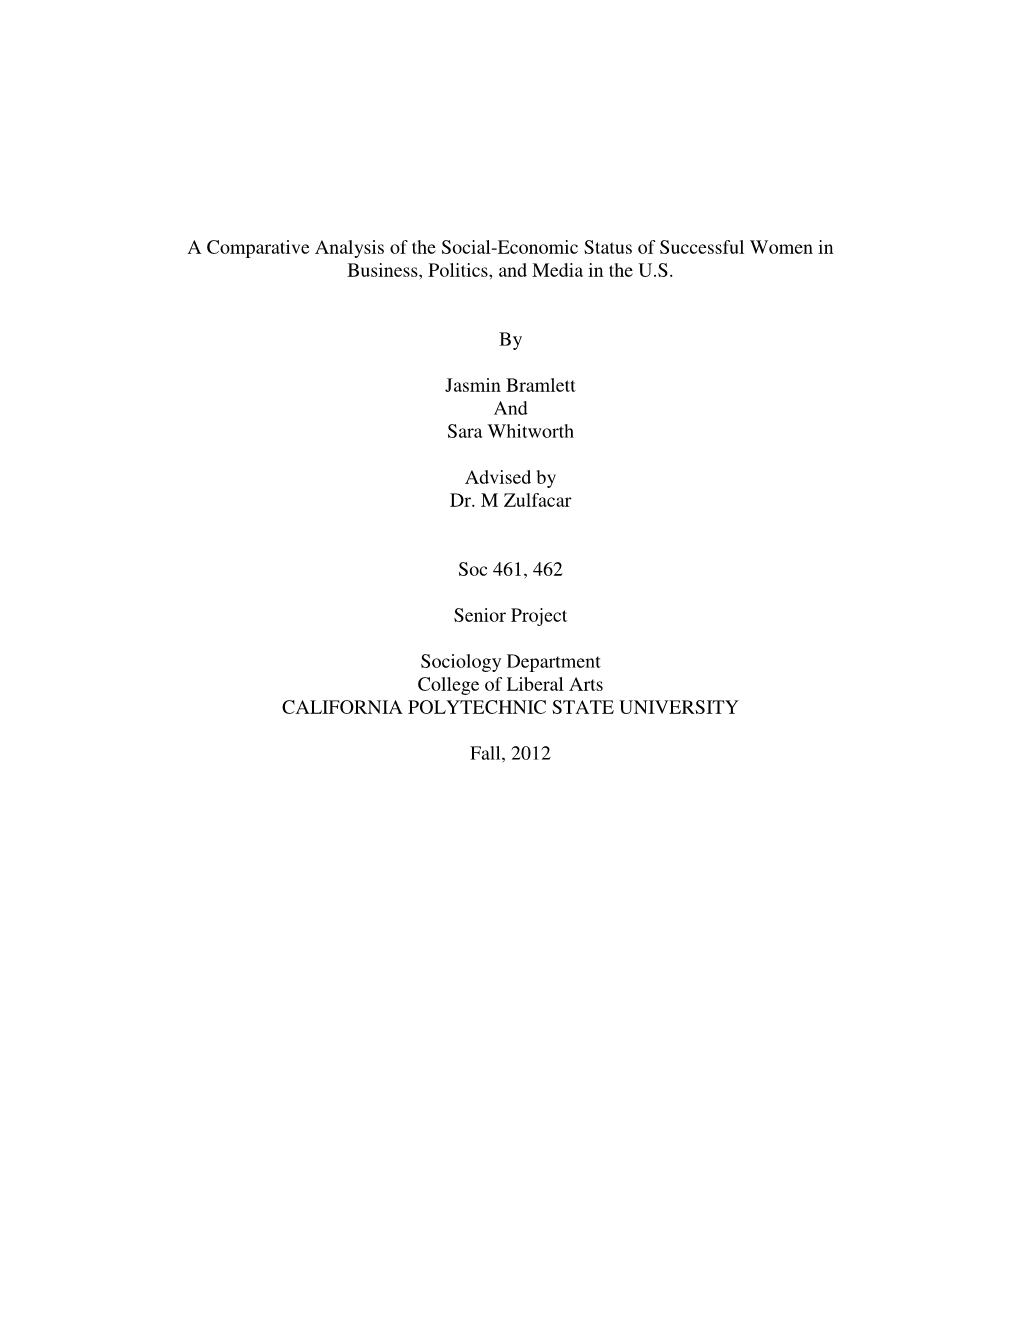 A Comparative Analysis of the Social-Economic Status of Successful Women in Business, Politics, and Media in the U.S